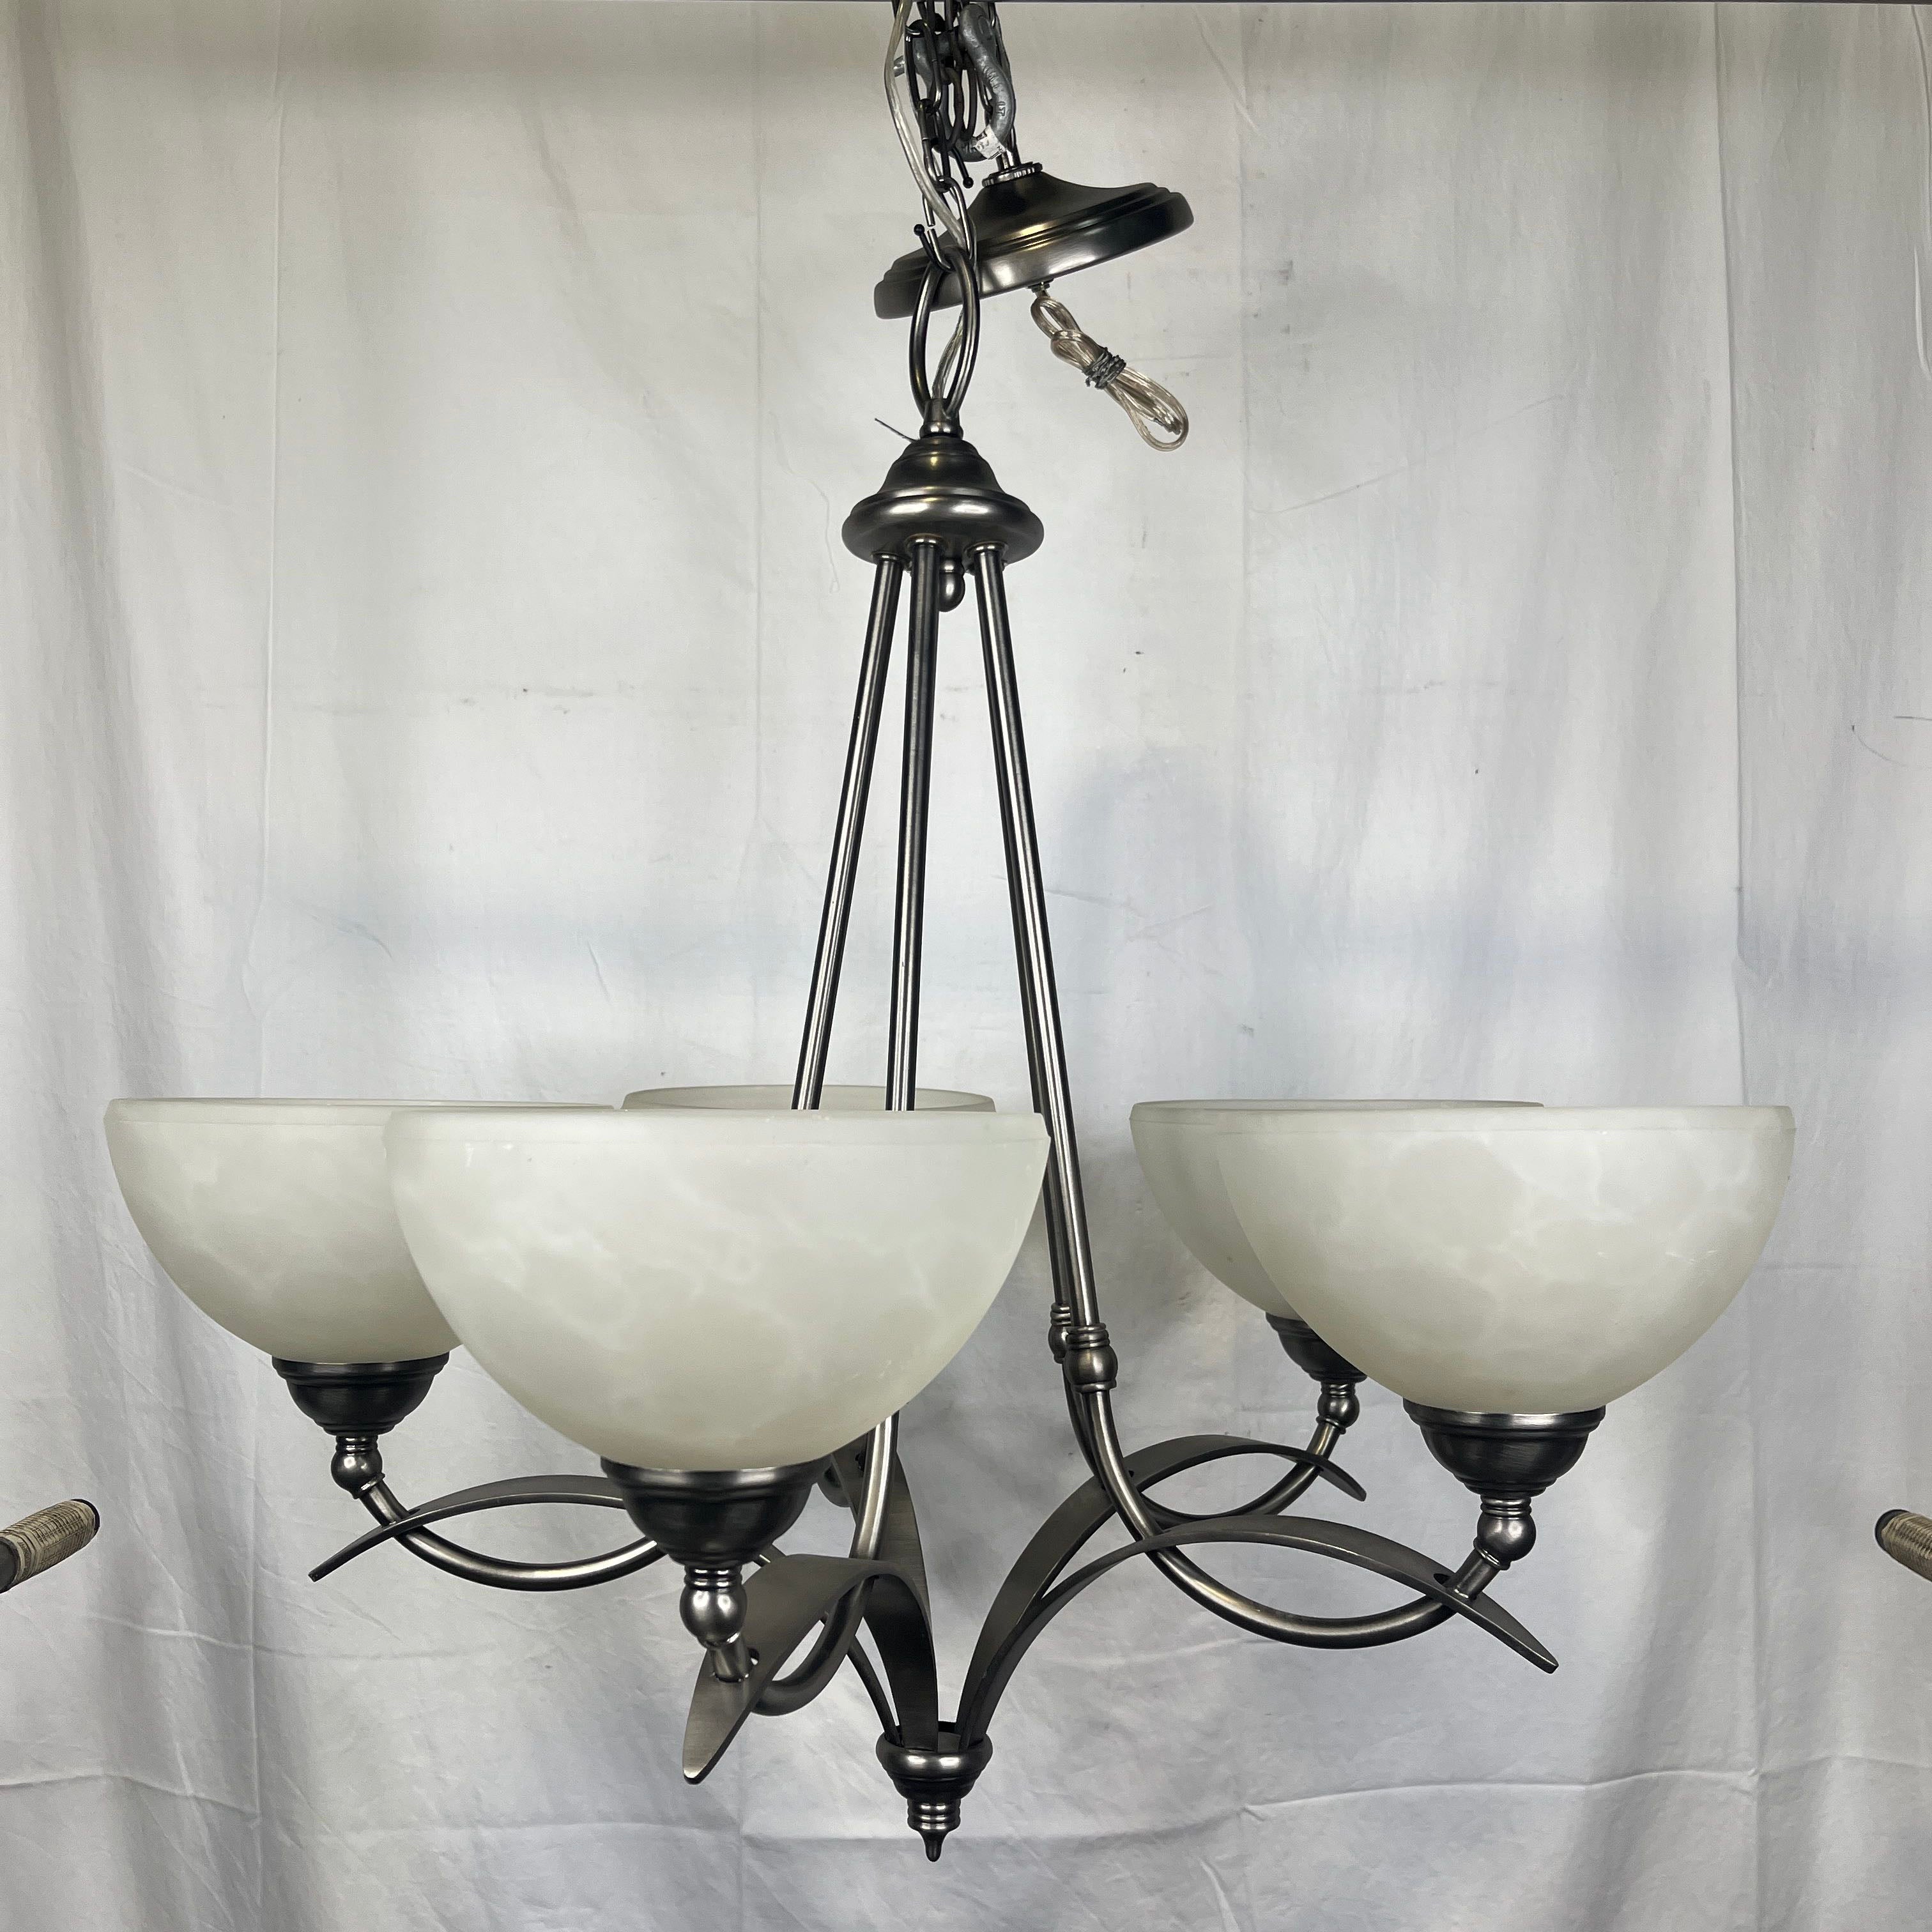 Kichler Lombard 5 Light Brushed Nickel with Frosted Glass Shades Chandelier